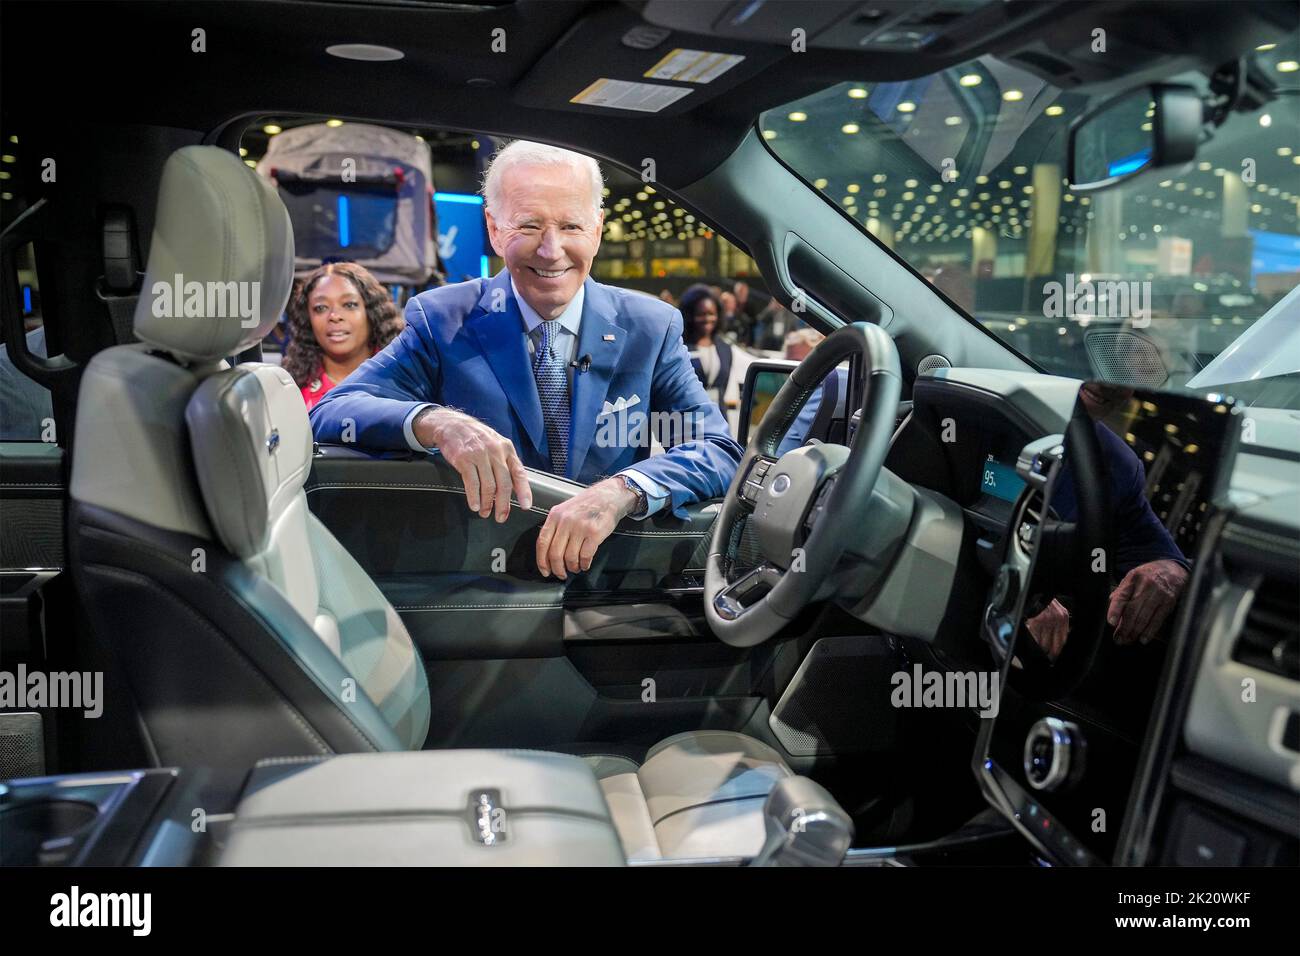 Detroit, United States of America. 14 September, 2022. U.S President Joe Biden, looks inside the Cadillac Lyriq electric vehicle during a visit to the 2022 North American International Auto Show at Huntington Place Convention Center, September 14, 2022 in Detroit, Michigan.  Credit: Adam Schultz/White House Photo/Alamy Live News Stock Photo